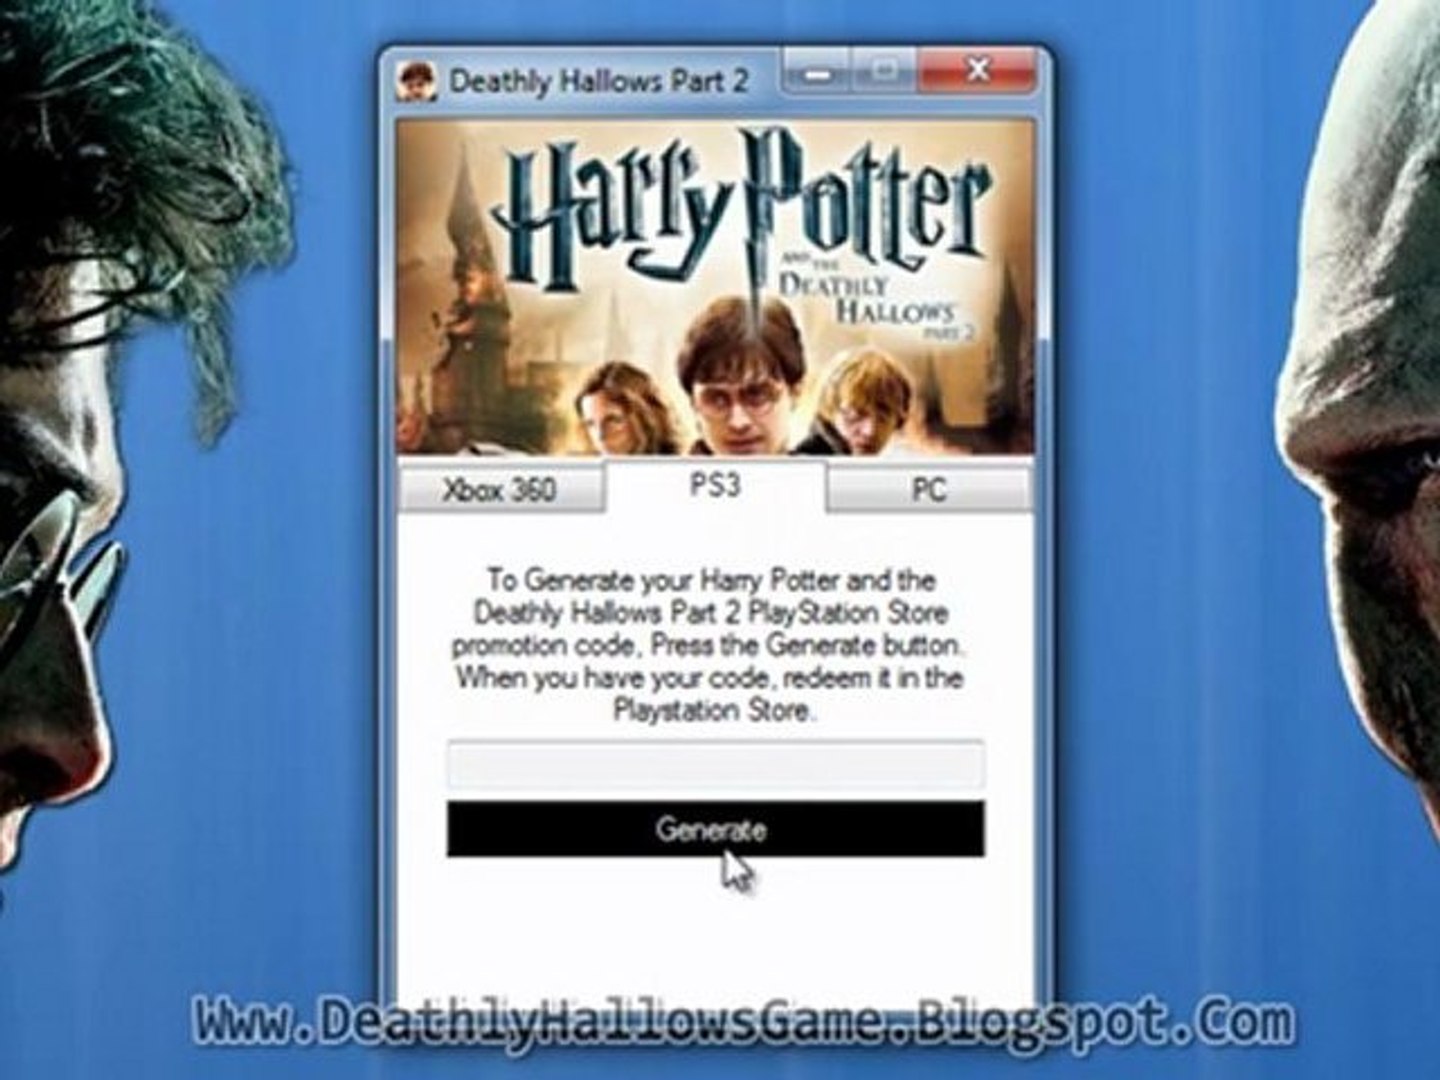 harry potter and the deathly hallows part 2 xbox 360